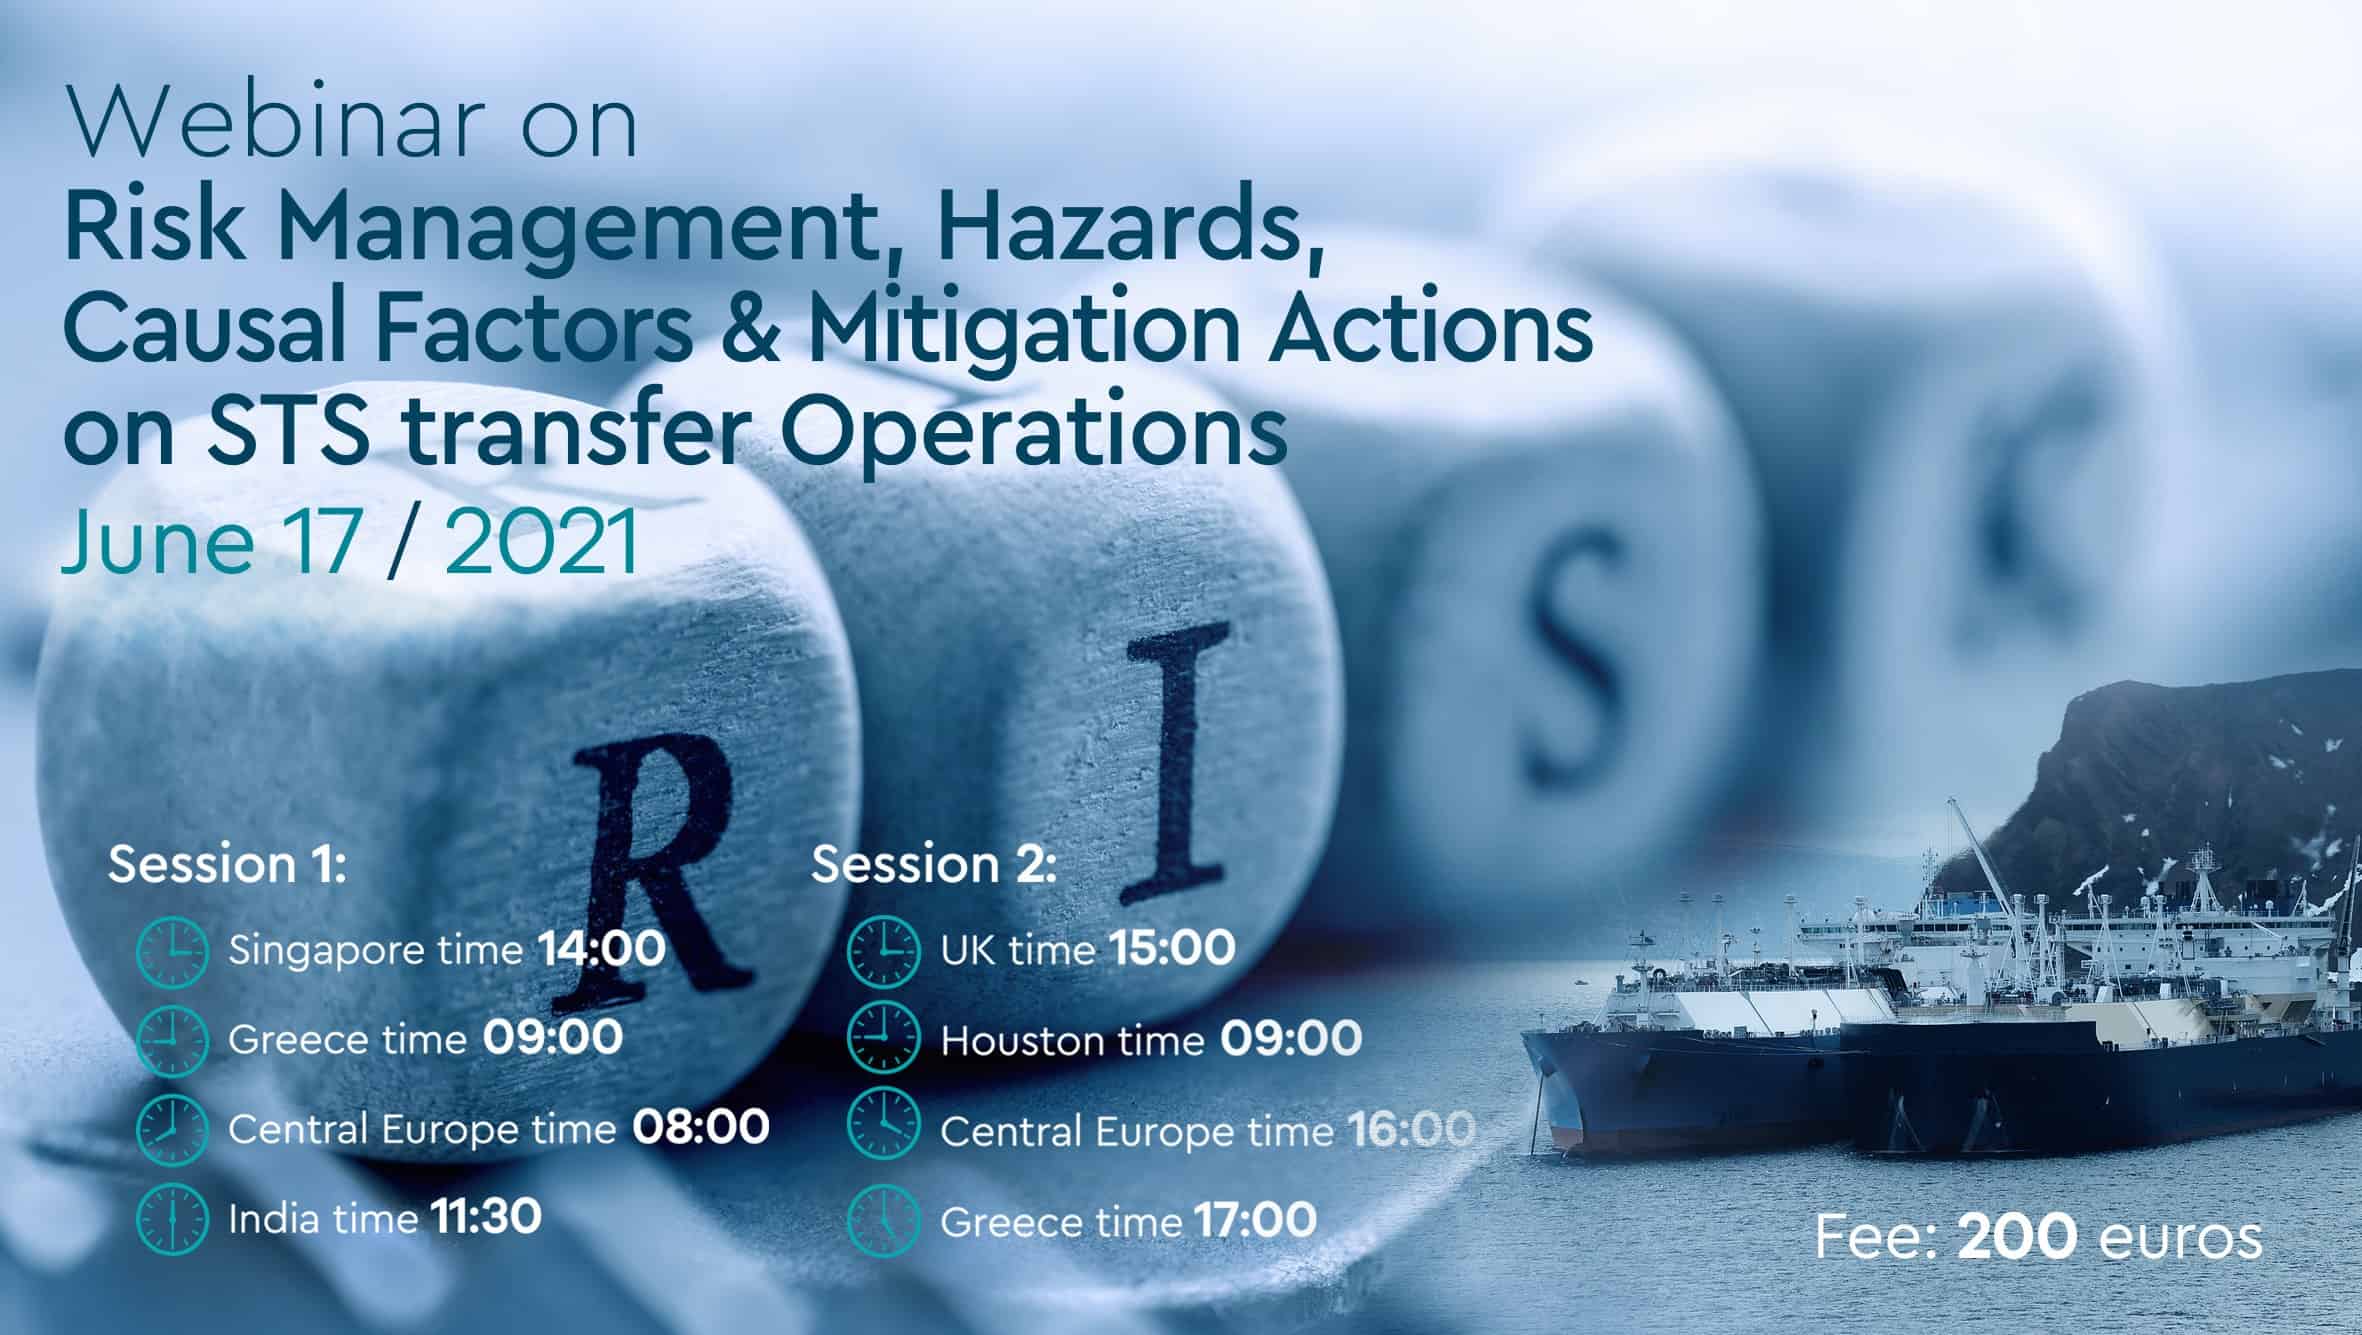 Risk Management, Hazards, Causal Factors & Mitigation Actions on STS Transfer Operations